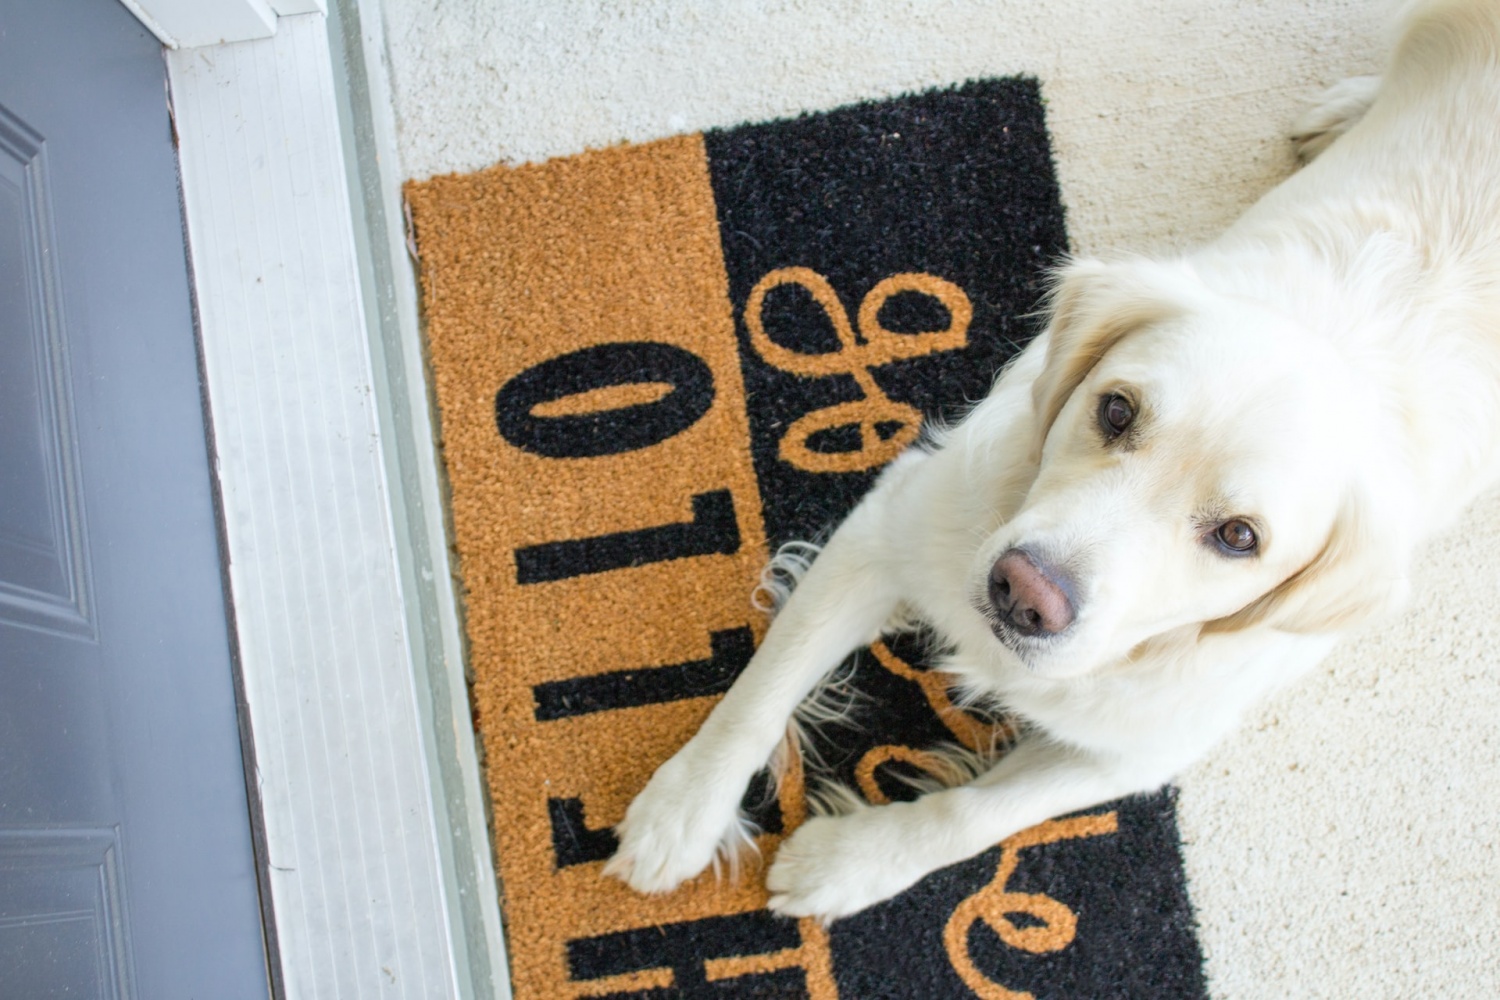 Facial Recognition in Smart Pet Door: AI-Powered System Keeps Critters Away